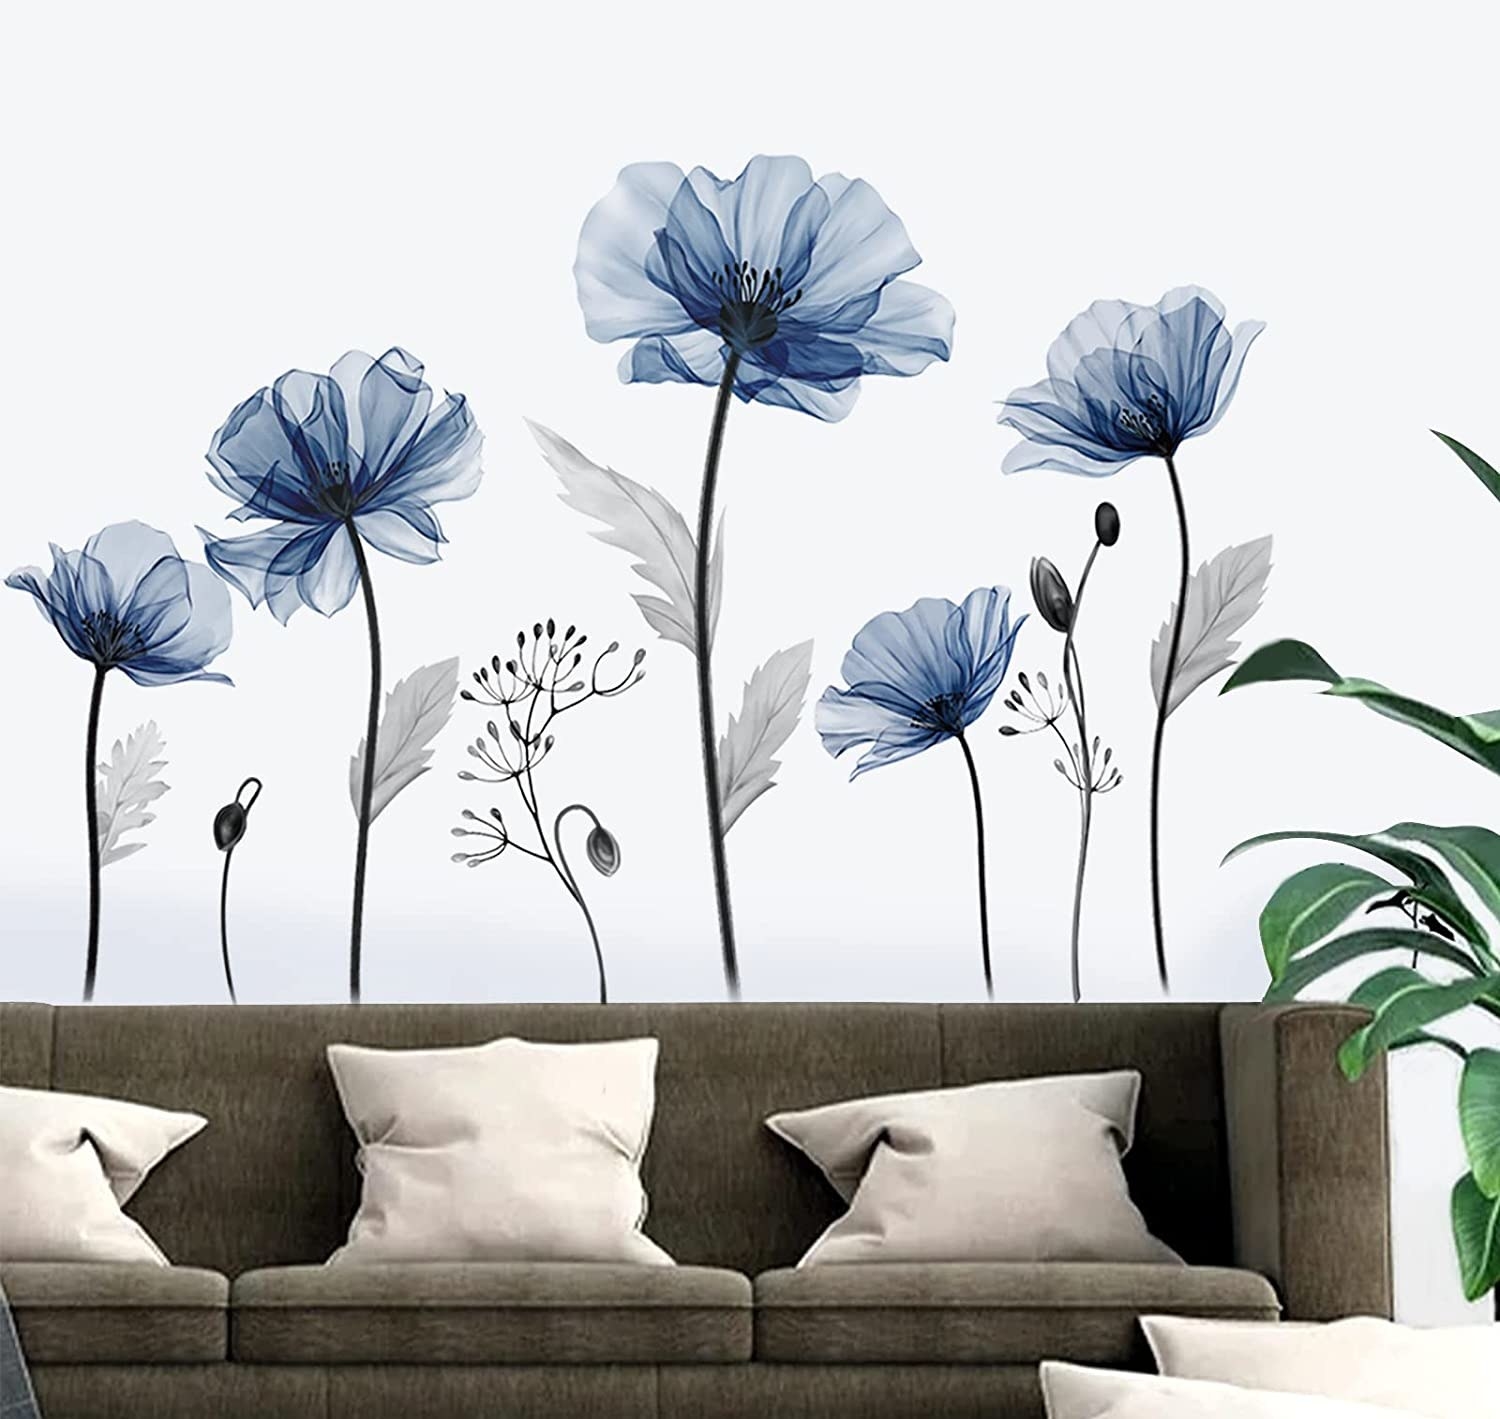 A couch with large floral wall decals behind it